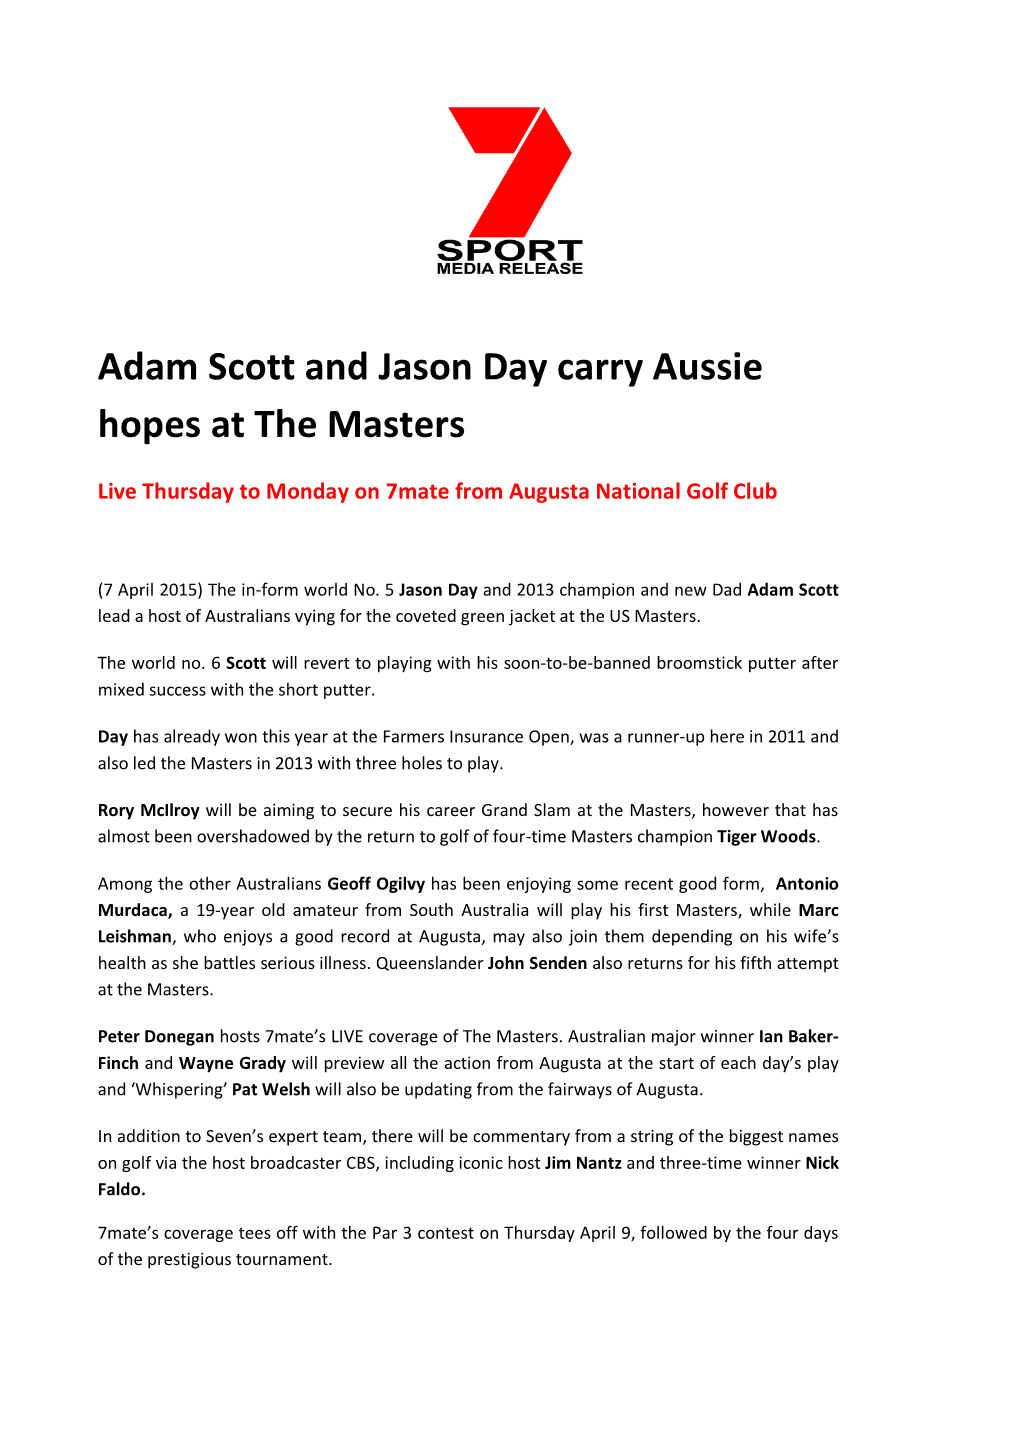 Adam Scott and Jason Day Carry Aussie Hopes at the Masters